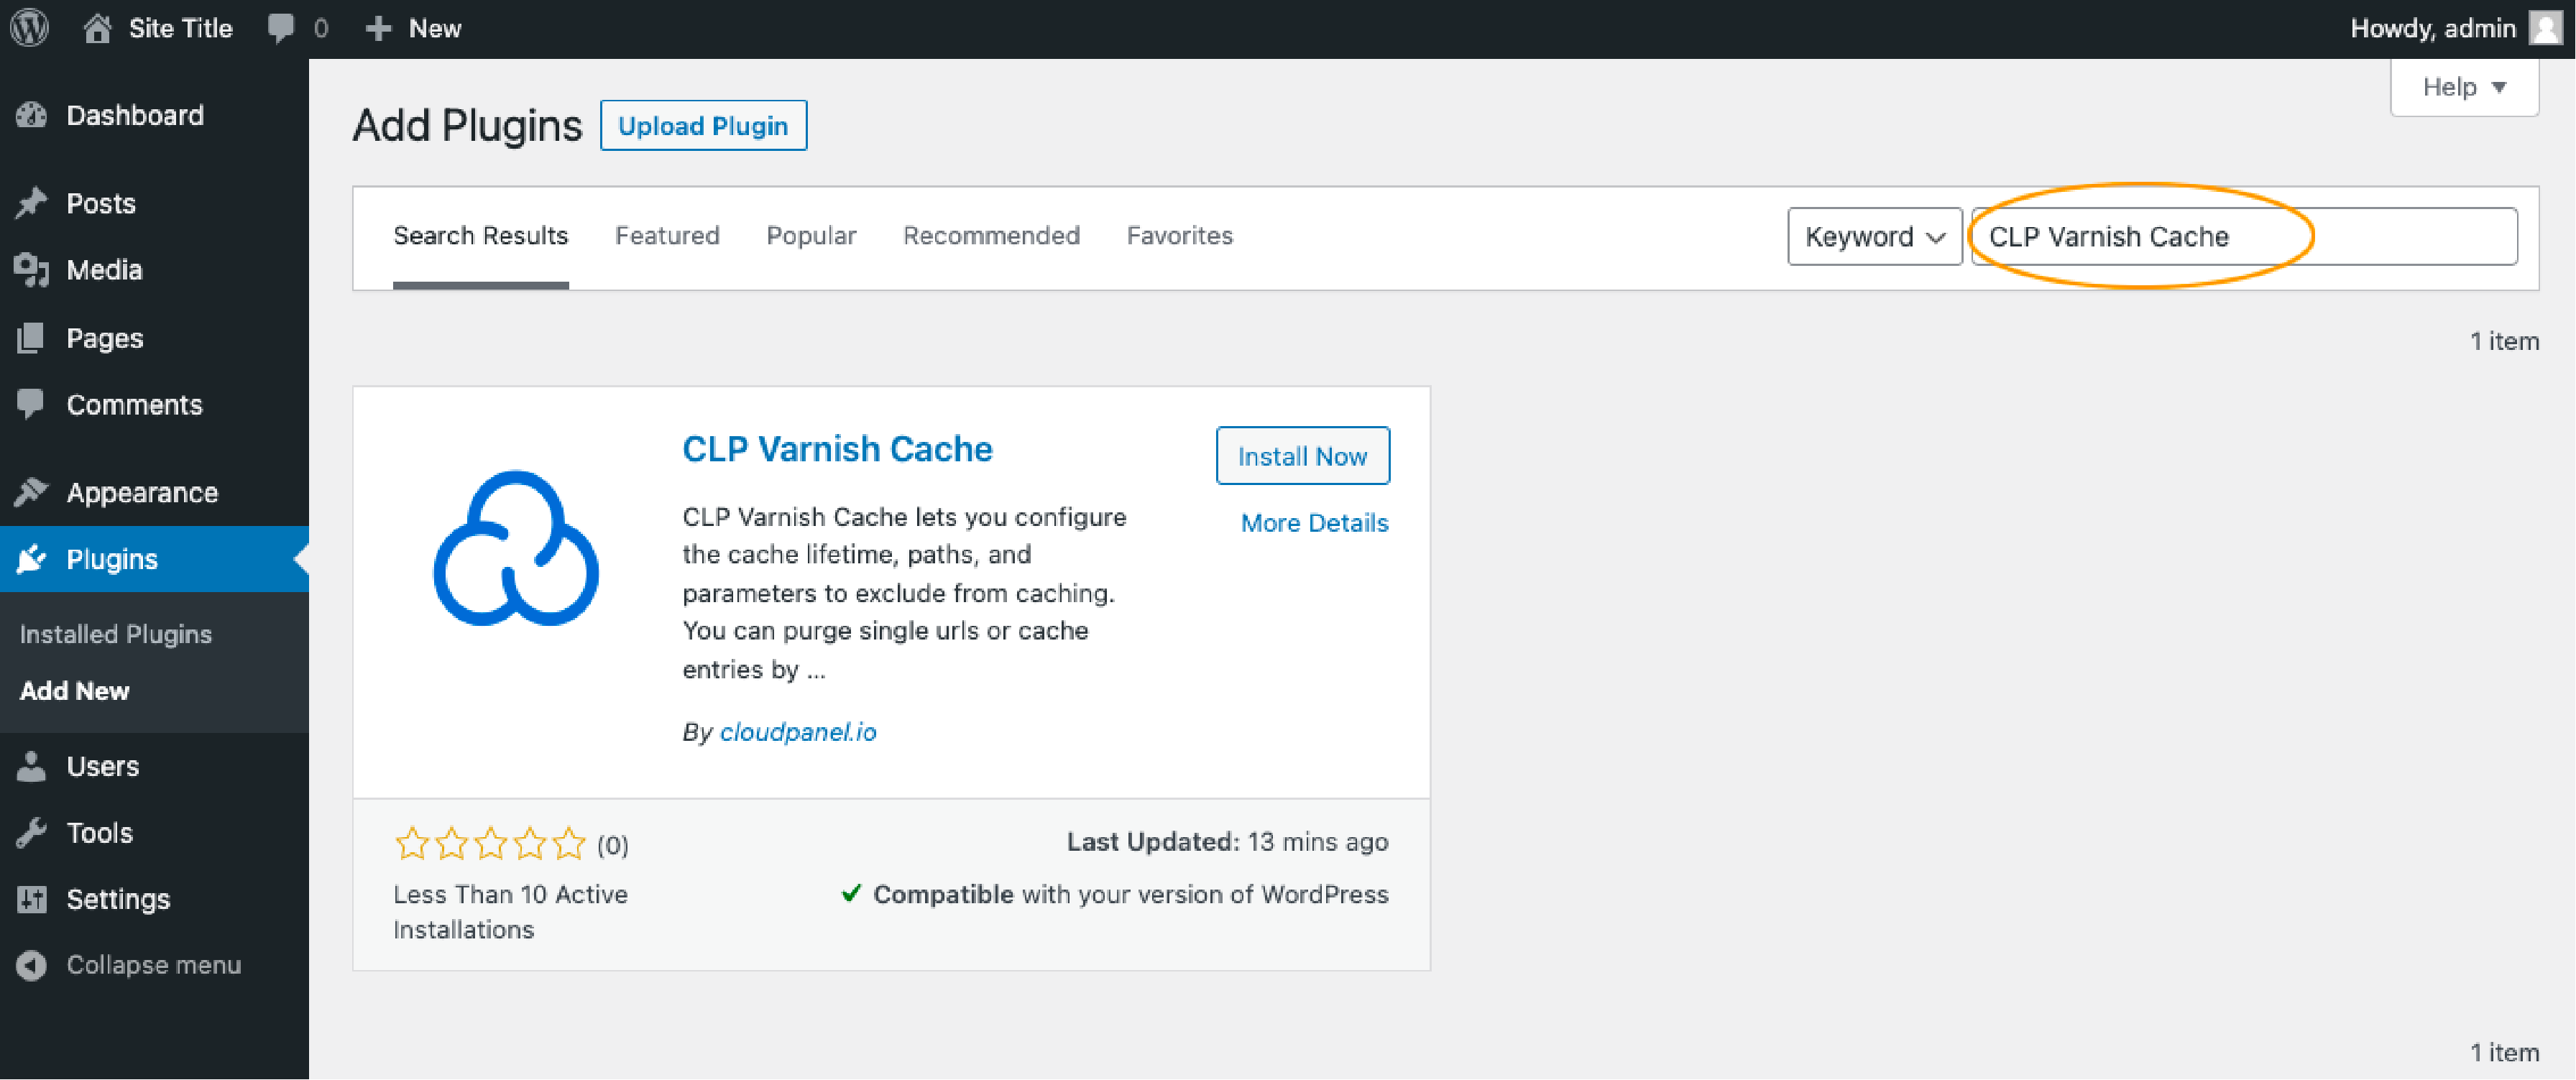 Step-by-step guide on how to install the CLP Varnish Cache Plugin for WordPress